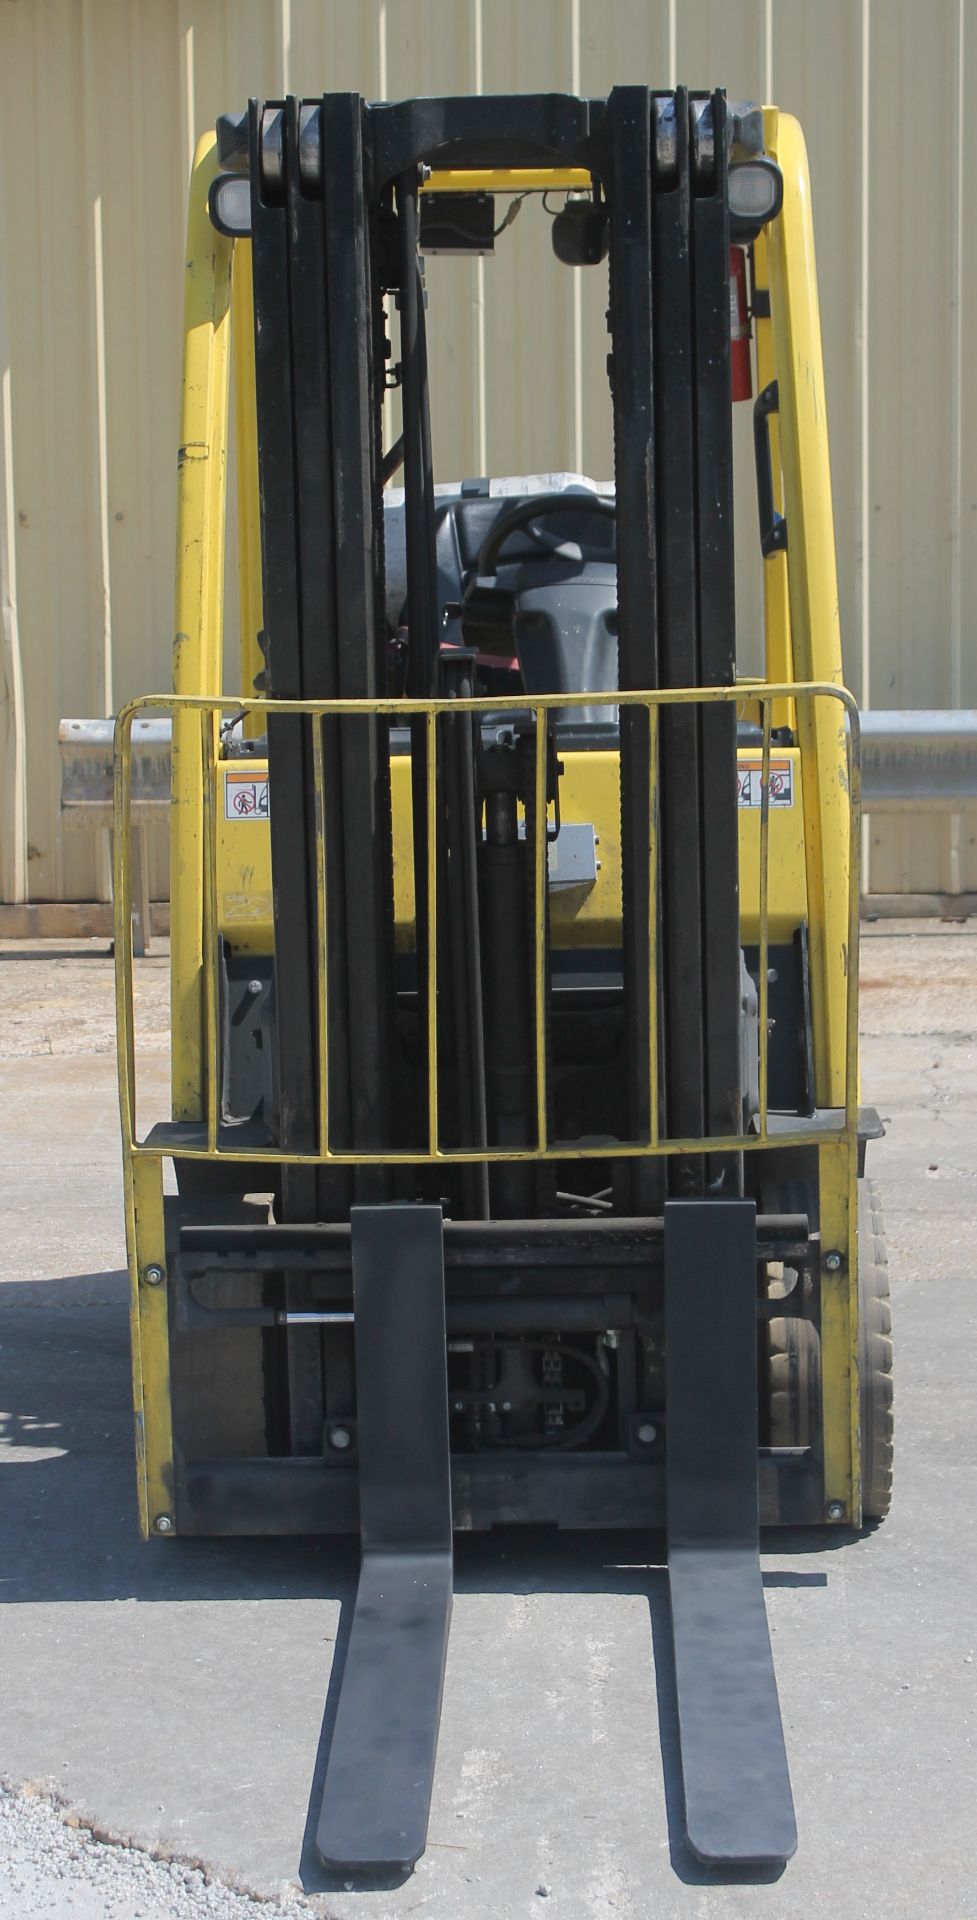 2012 HYSTER 5000 LB CAPACITY PROPANE FORKLIFT, 3 STAGE MAST (CHECK VIDEO) - Image 4 of 7